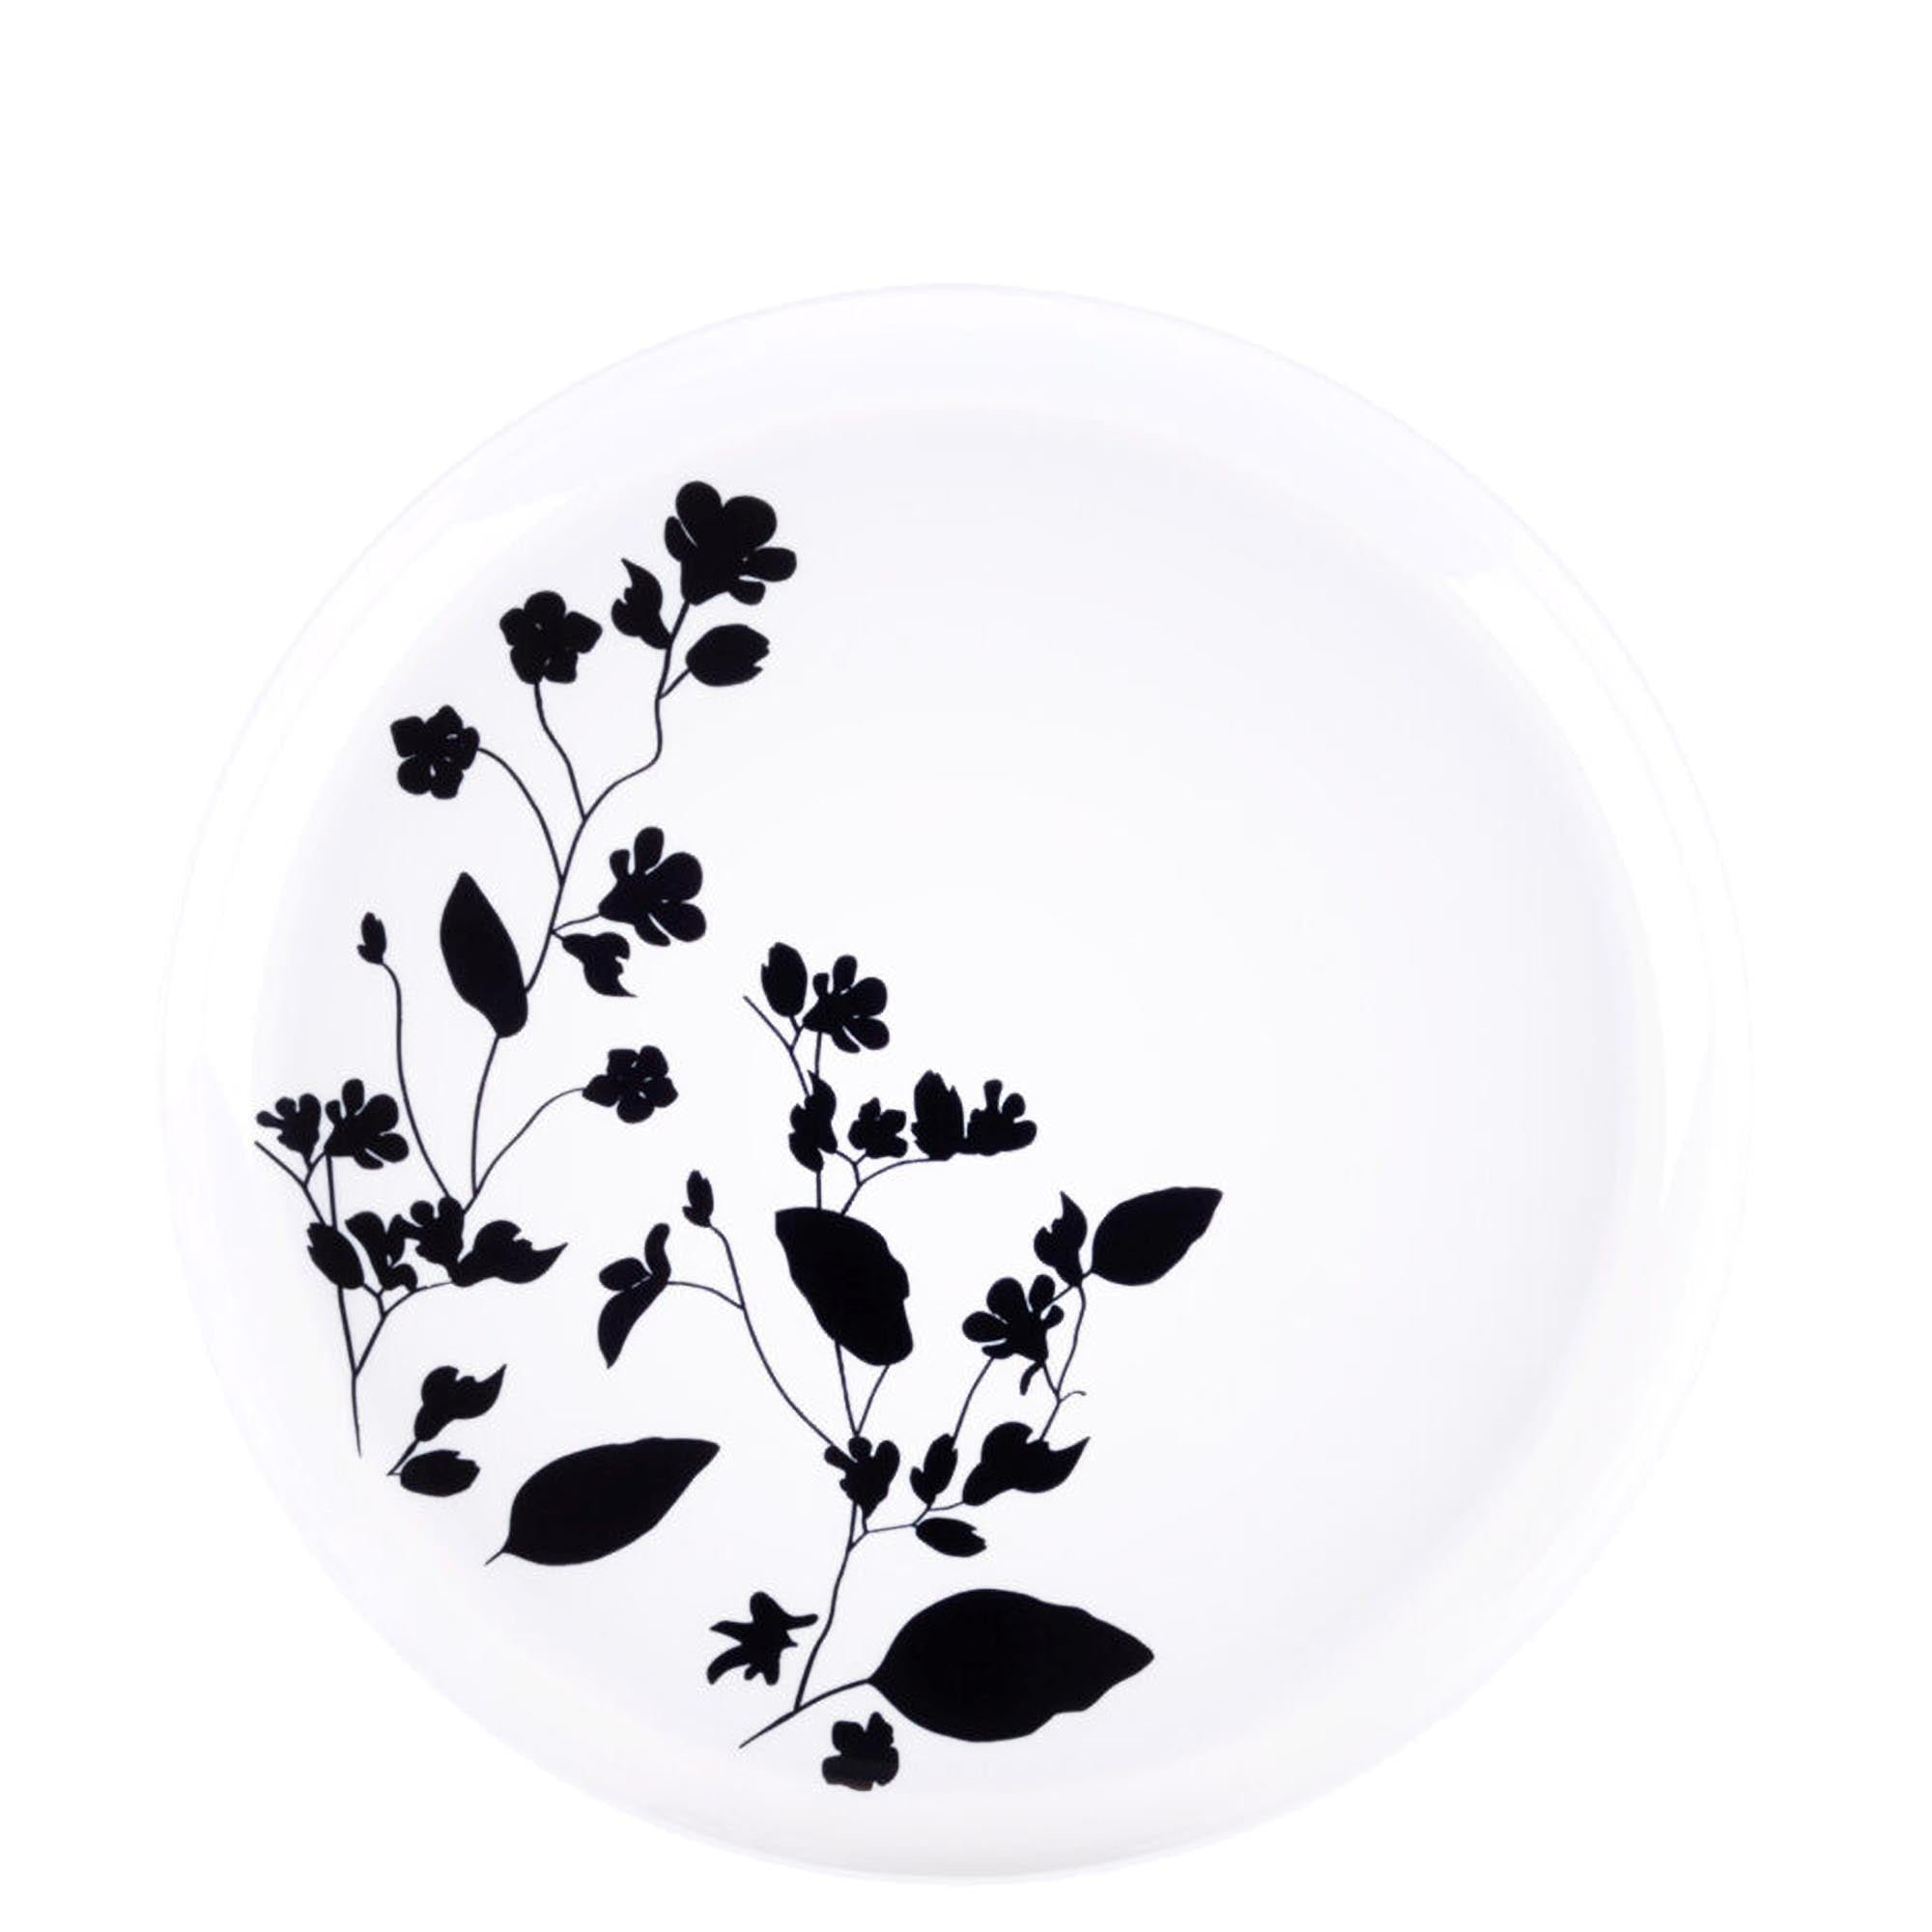 120 PACK) EcoQuality 6 inch Round White Plastic Plates with Black Garden  Design - Disposable China Like Party Plates, Small Heavy Duty Dessert Plates,  Salad Plate, Dinner, Wedding, Serveware 